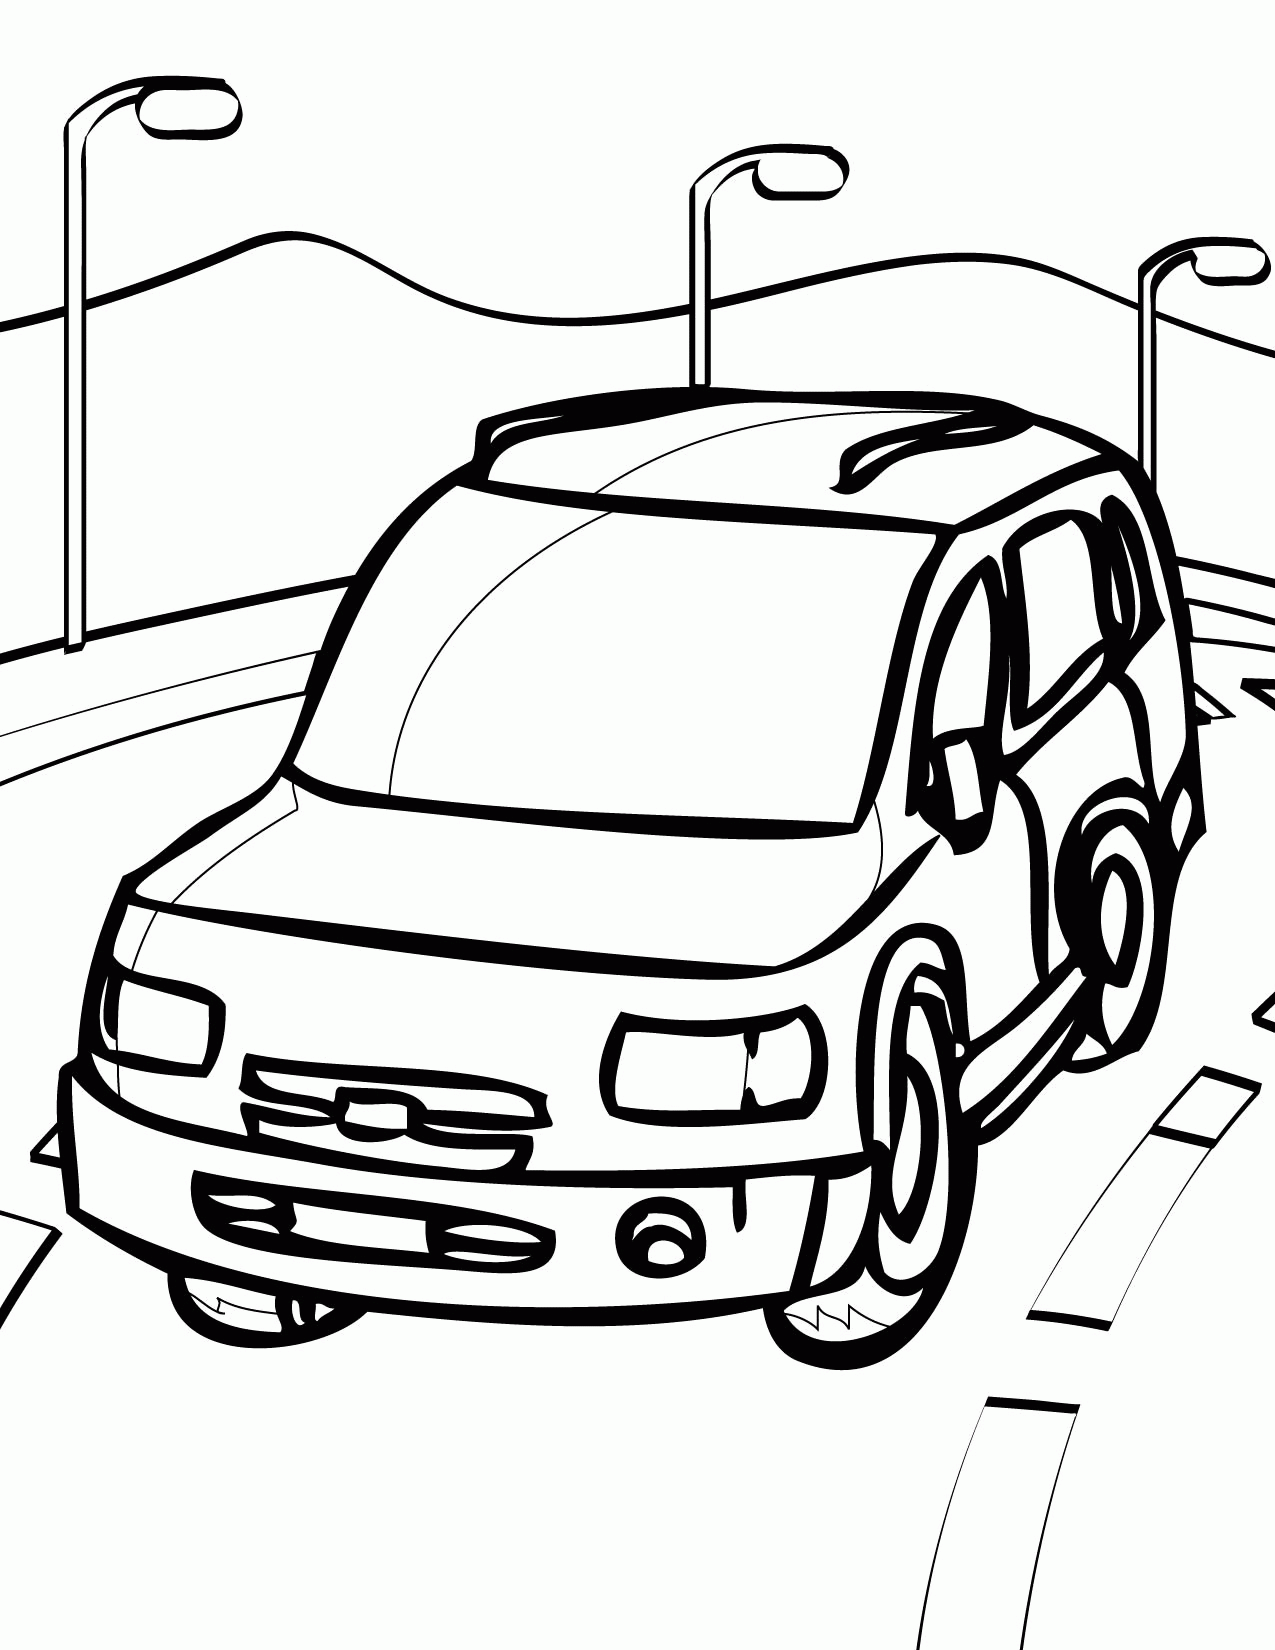 Transportation Coloring Pages For Toddlers Transportation Coloring ...